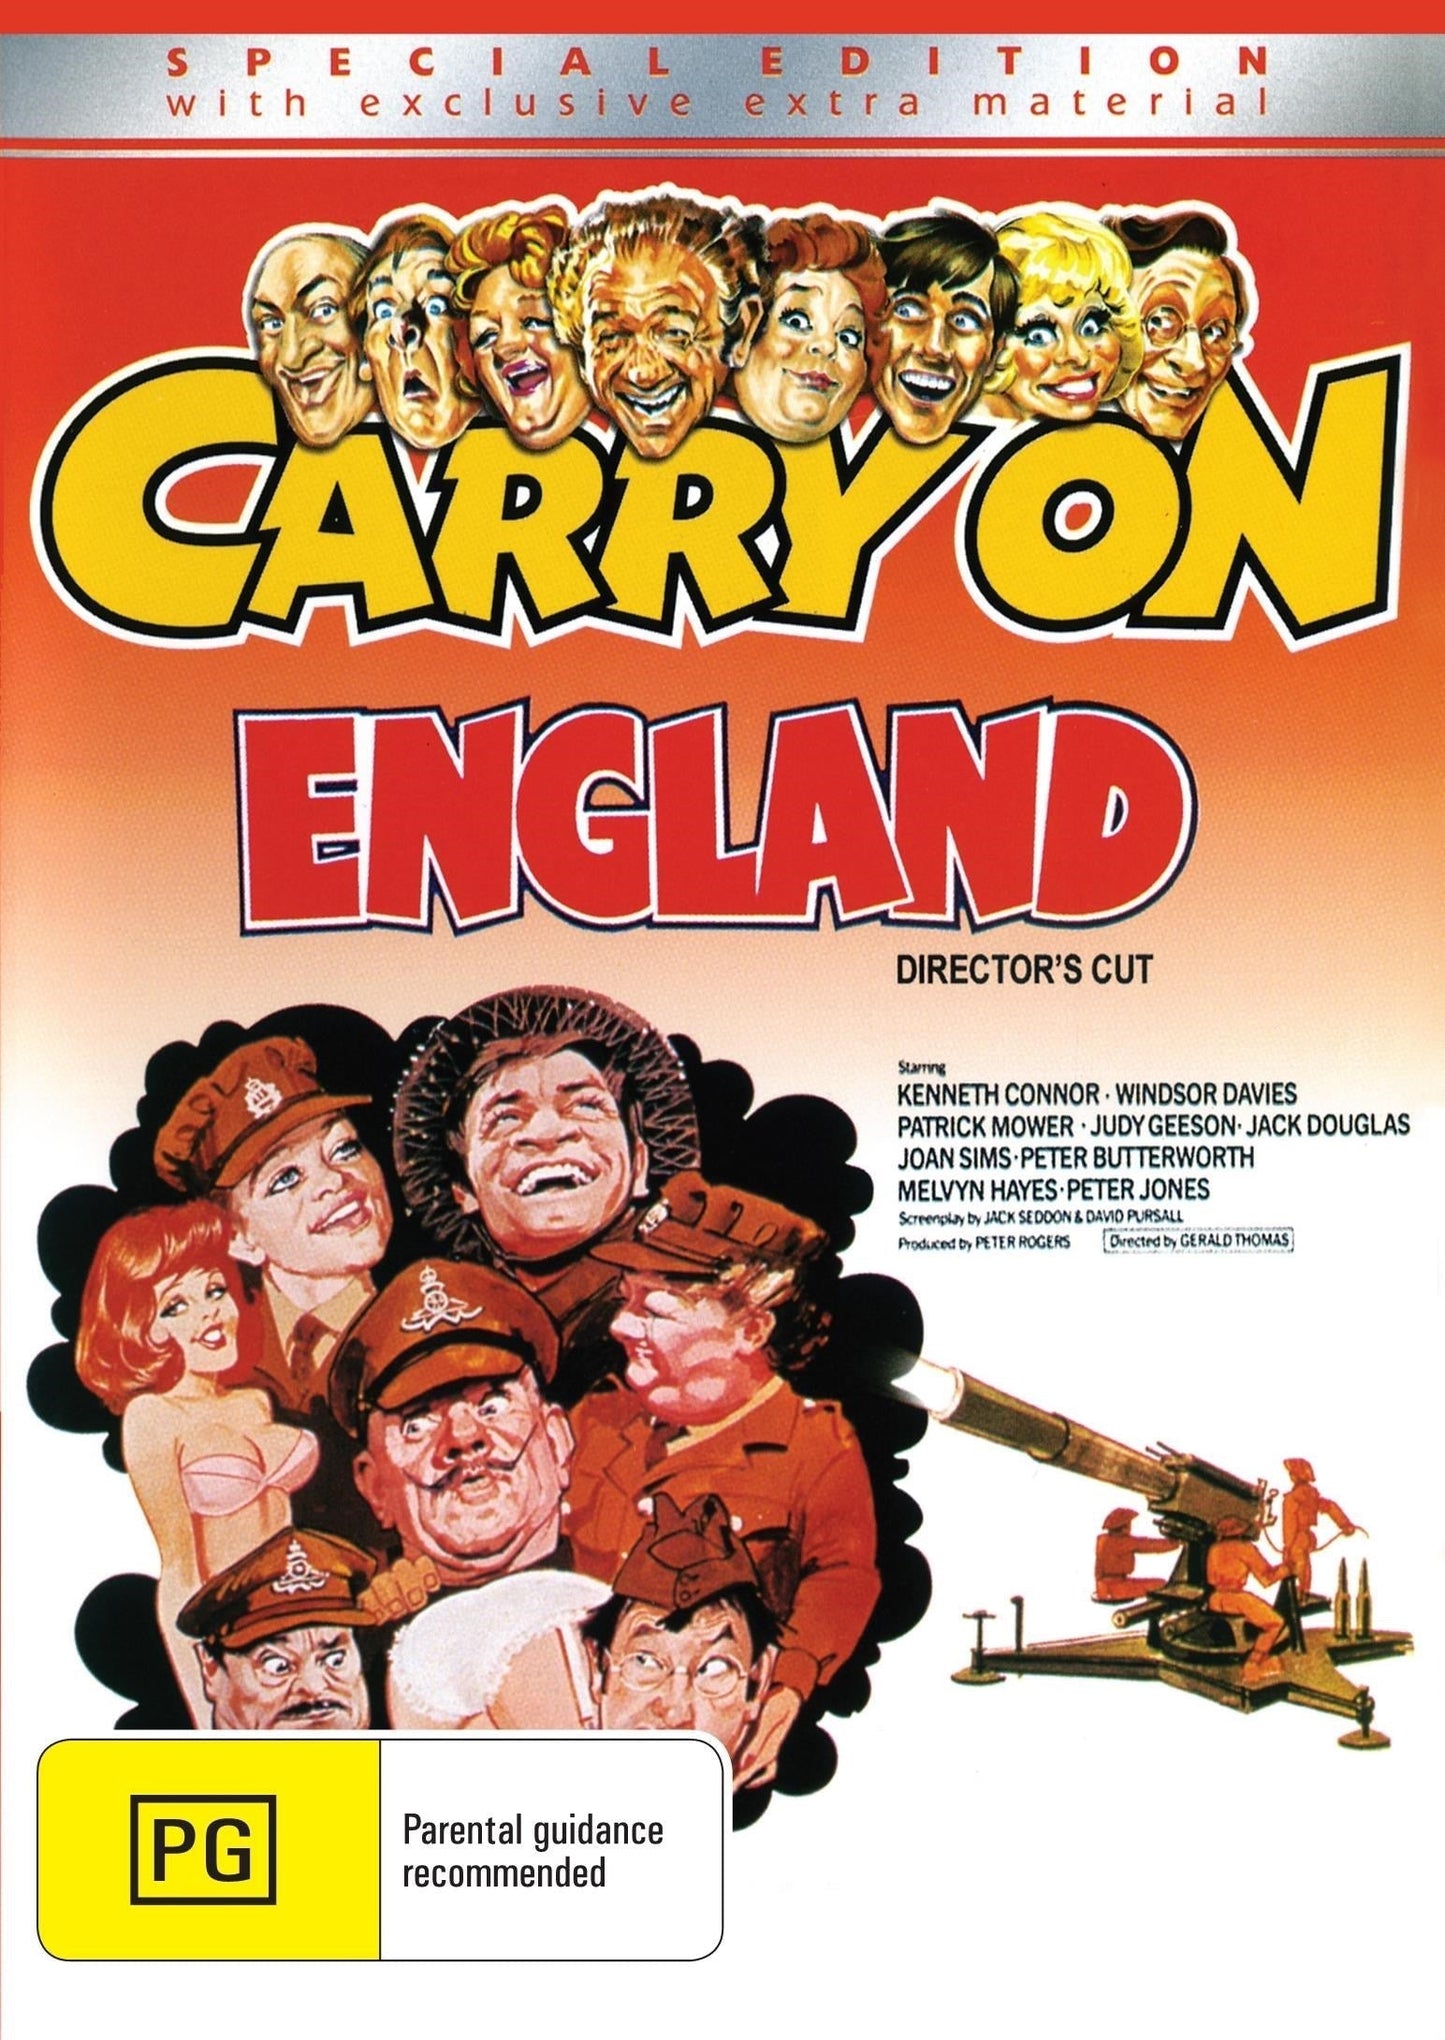 Carry On England rareandcollectibledvds